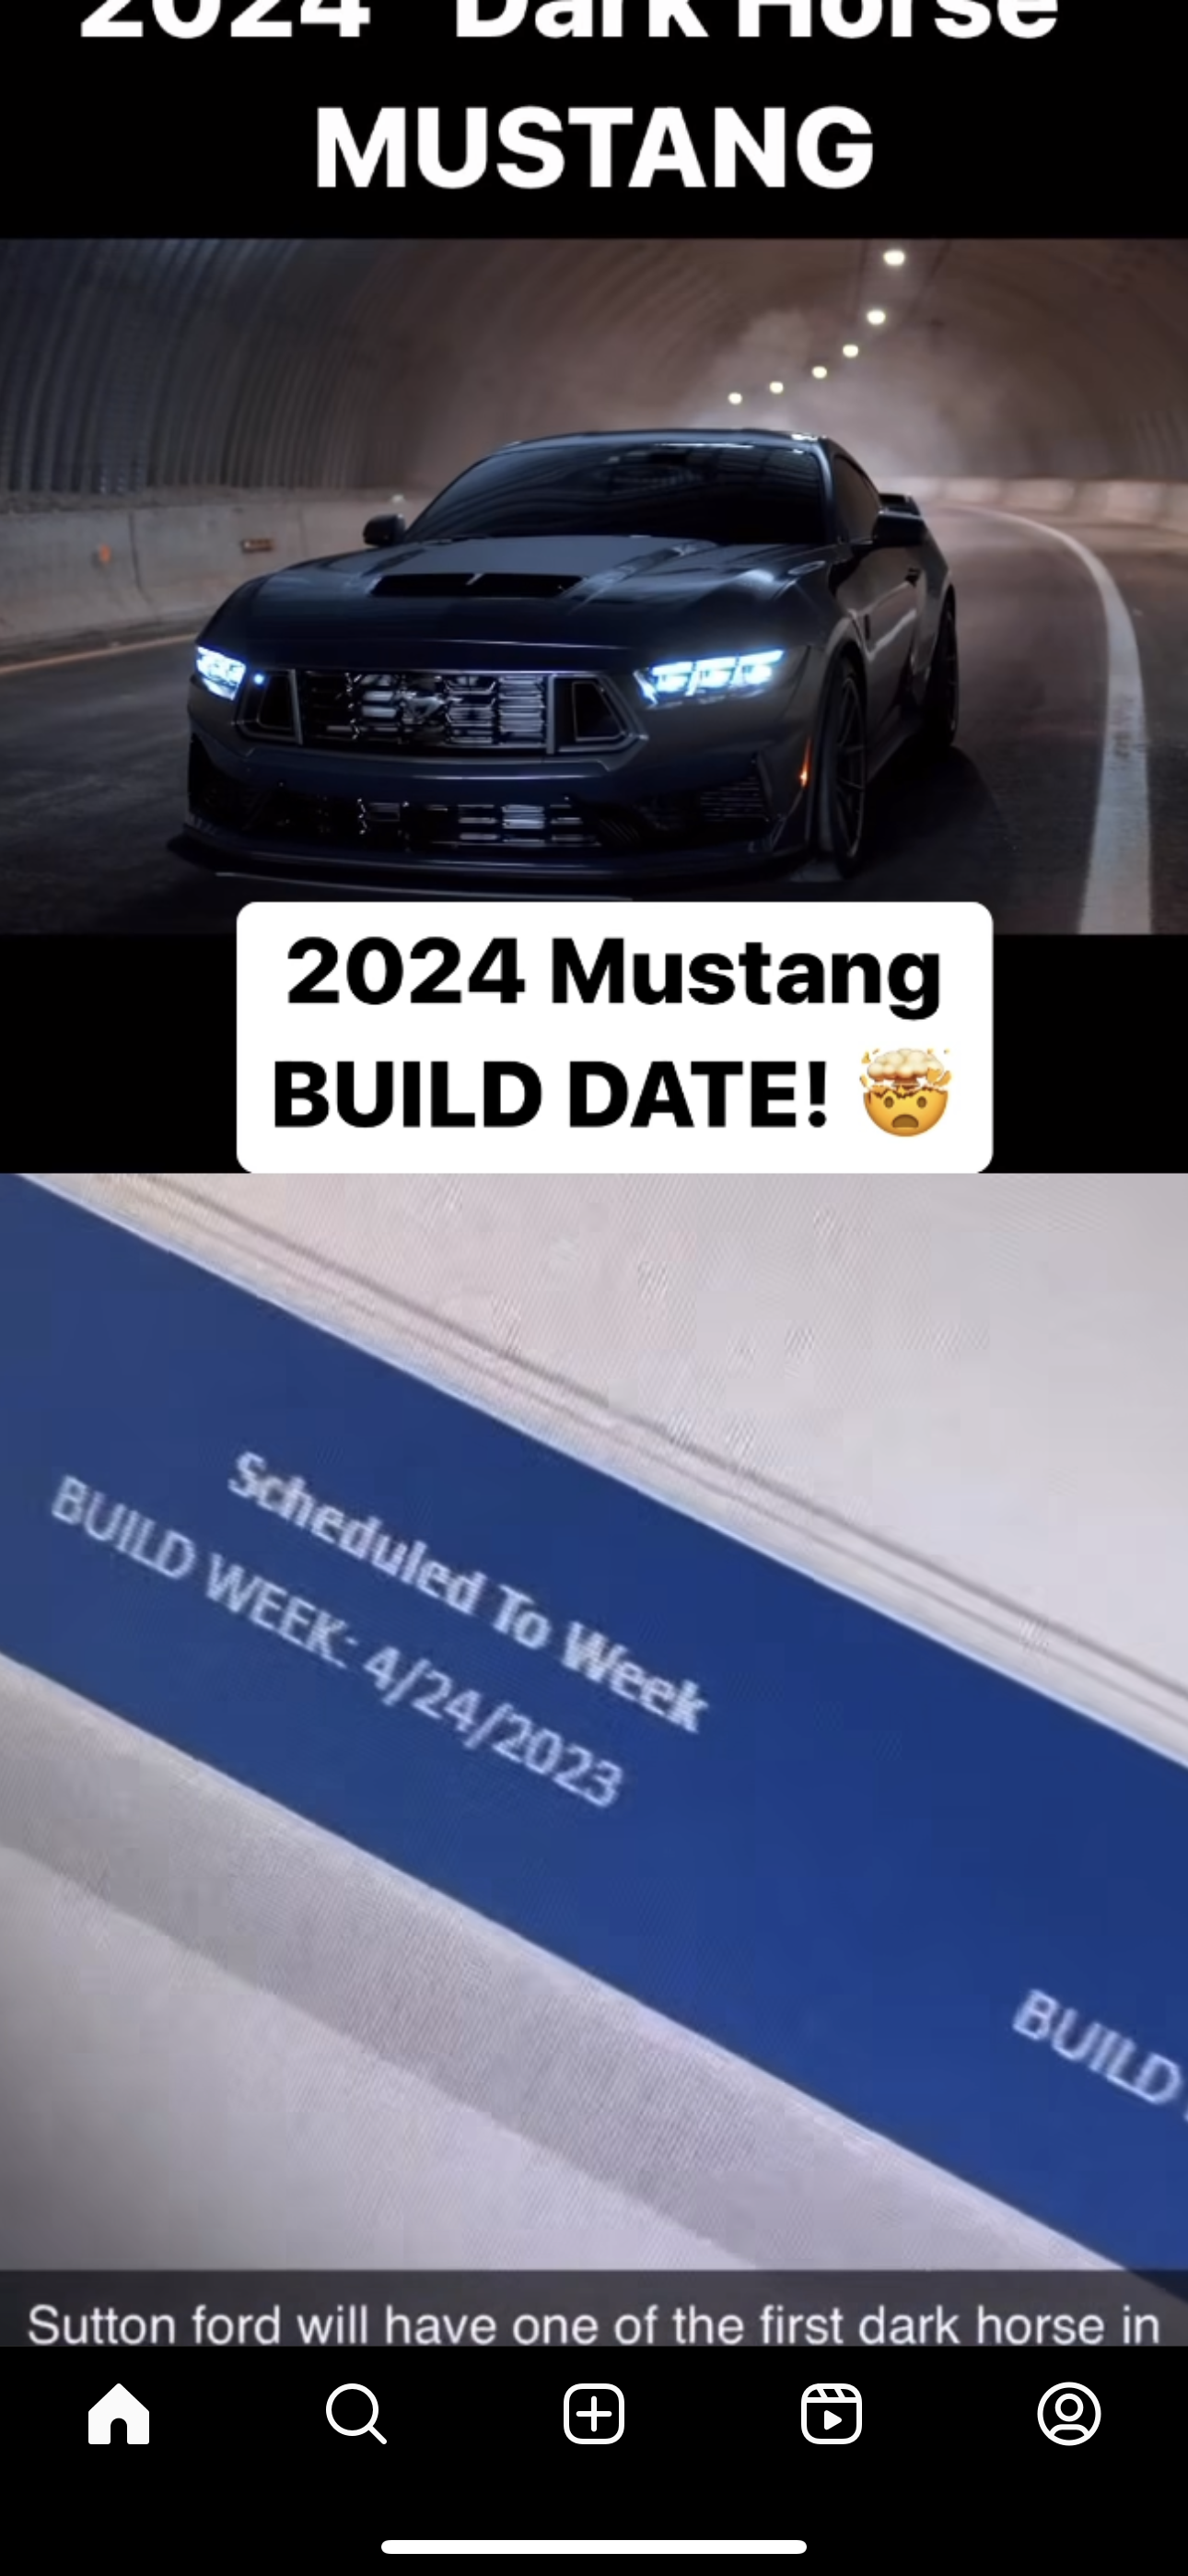 S650 Mustang Start of 2024MY Mustang production is 4/11/23. Order banks open 1/14/23. Scheduling begins 3/11/23 (per Donlan and Element Fleet Forecasts) 059F2EB8-A5C9-403C-B645-338BE76B0131